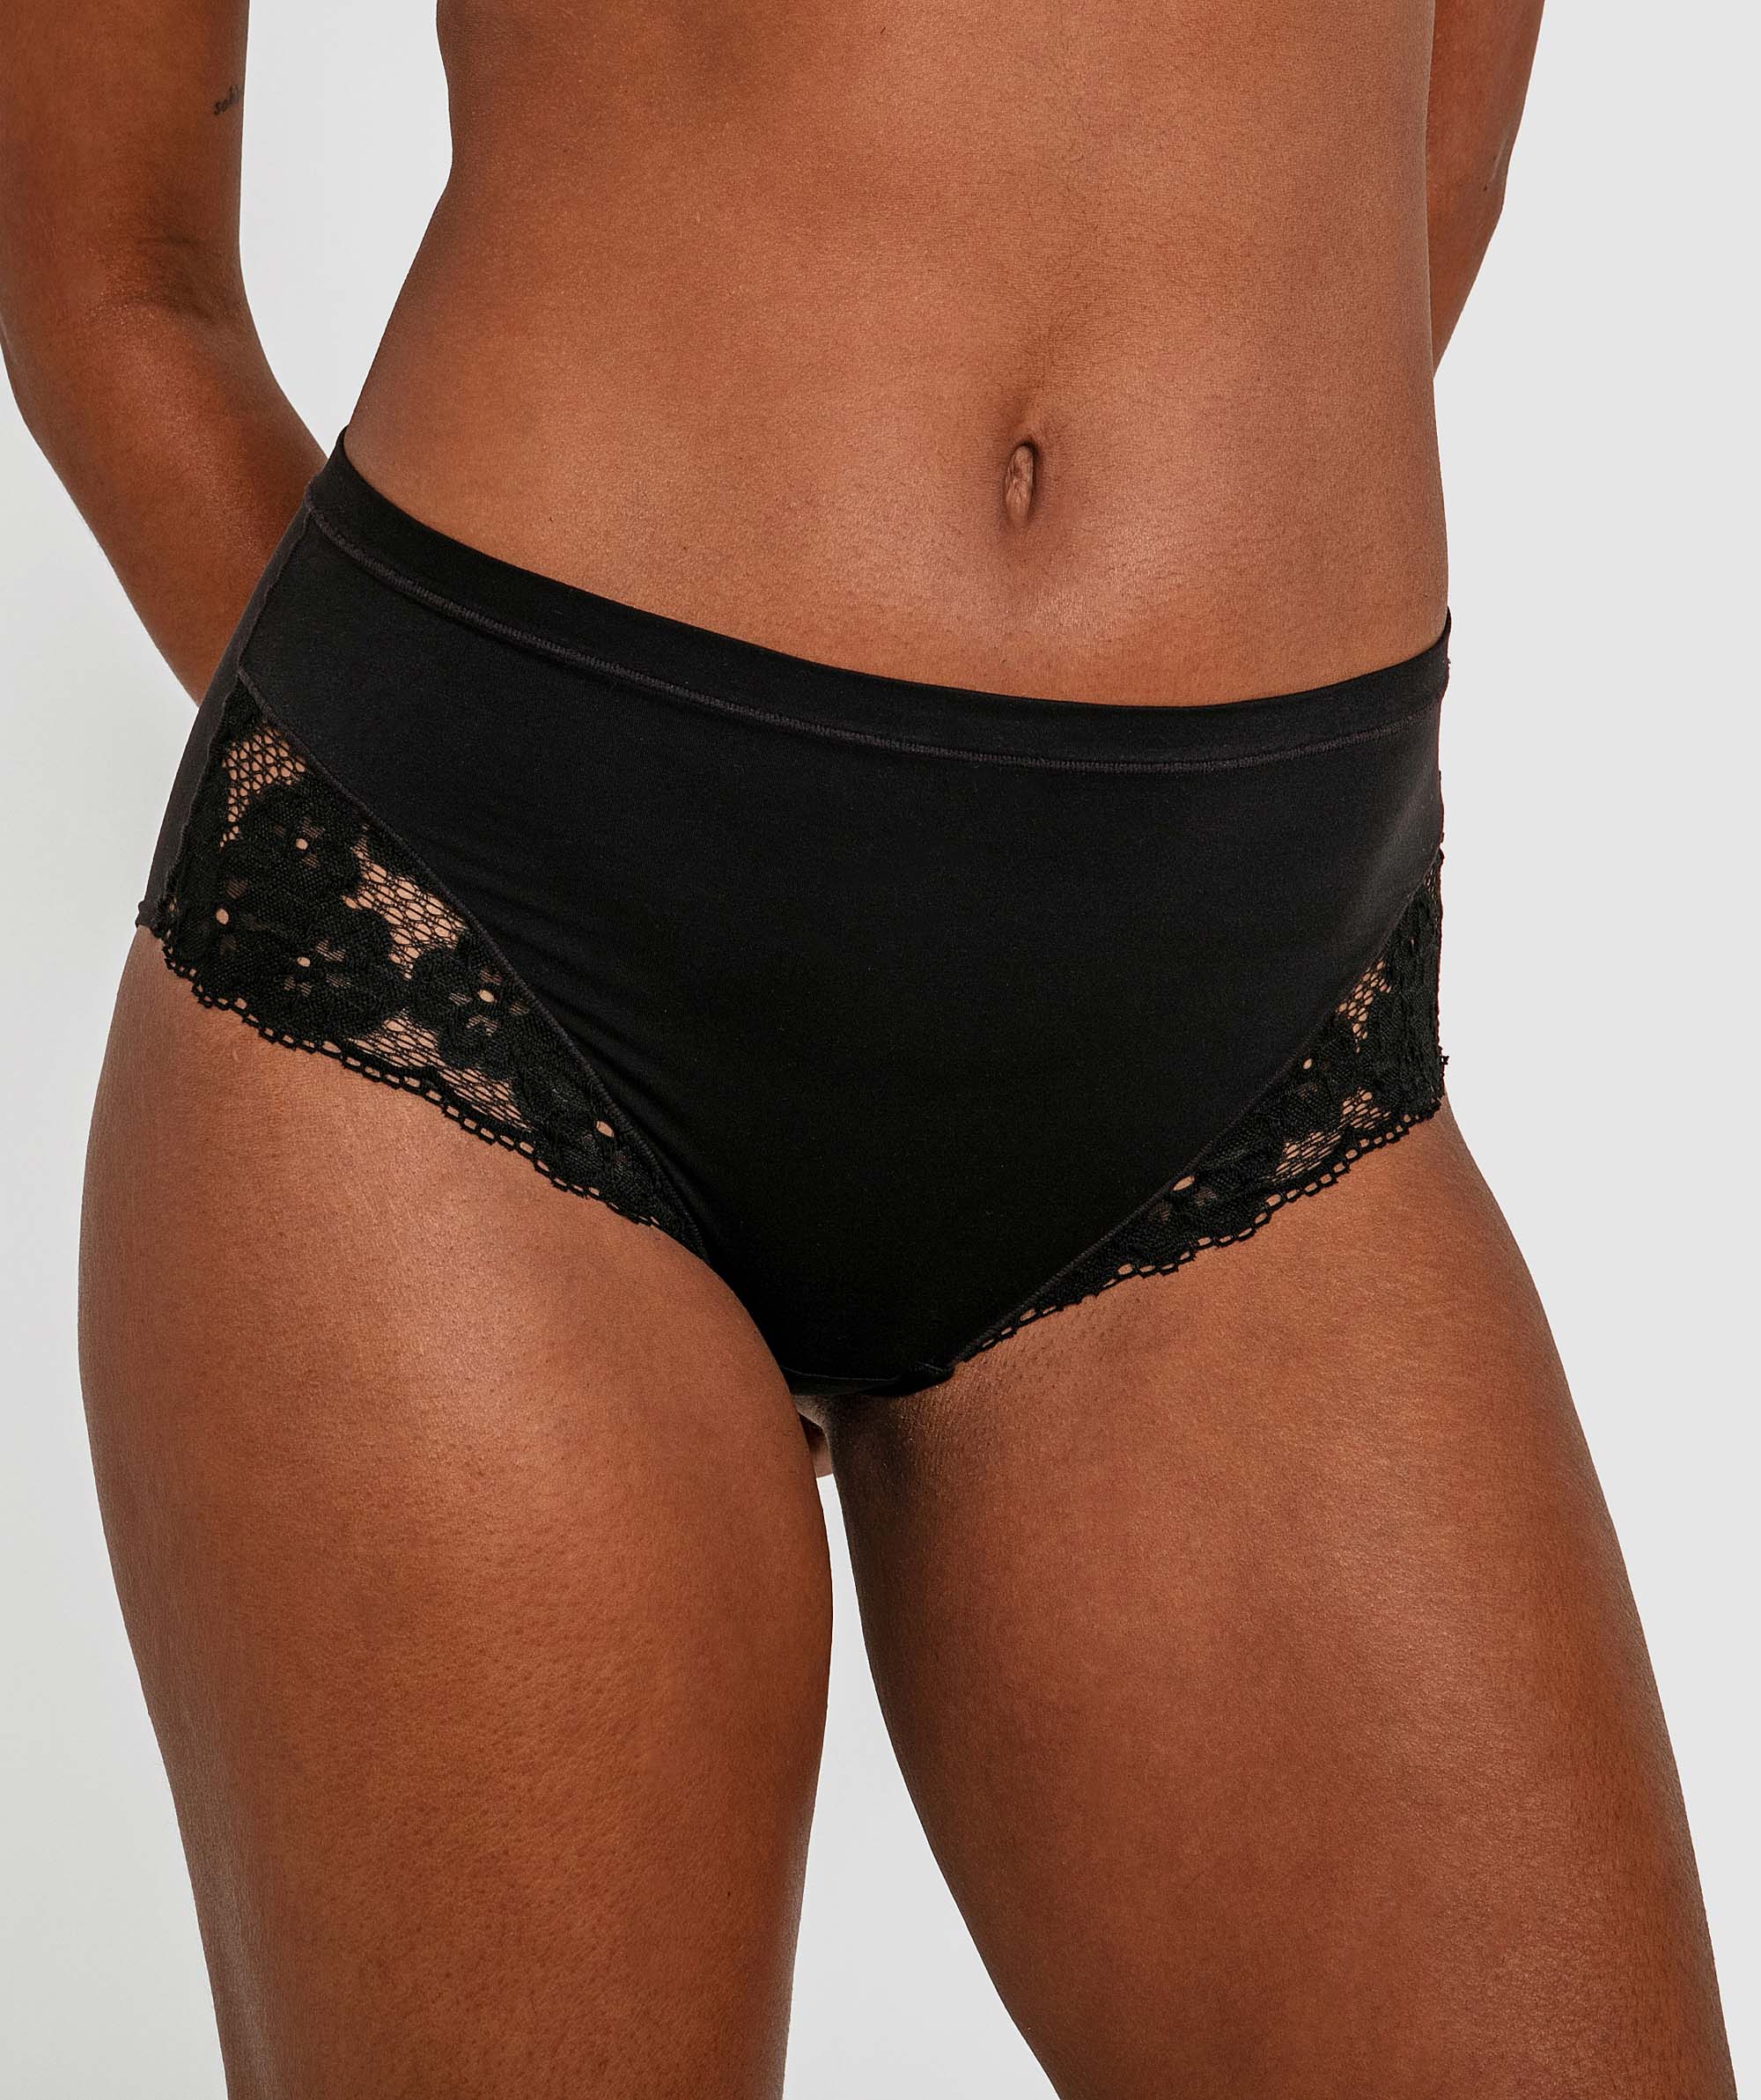 Planet Bliss Lace Full Brief Knicker - Black